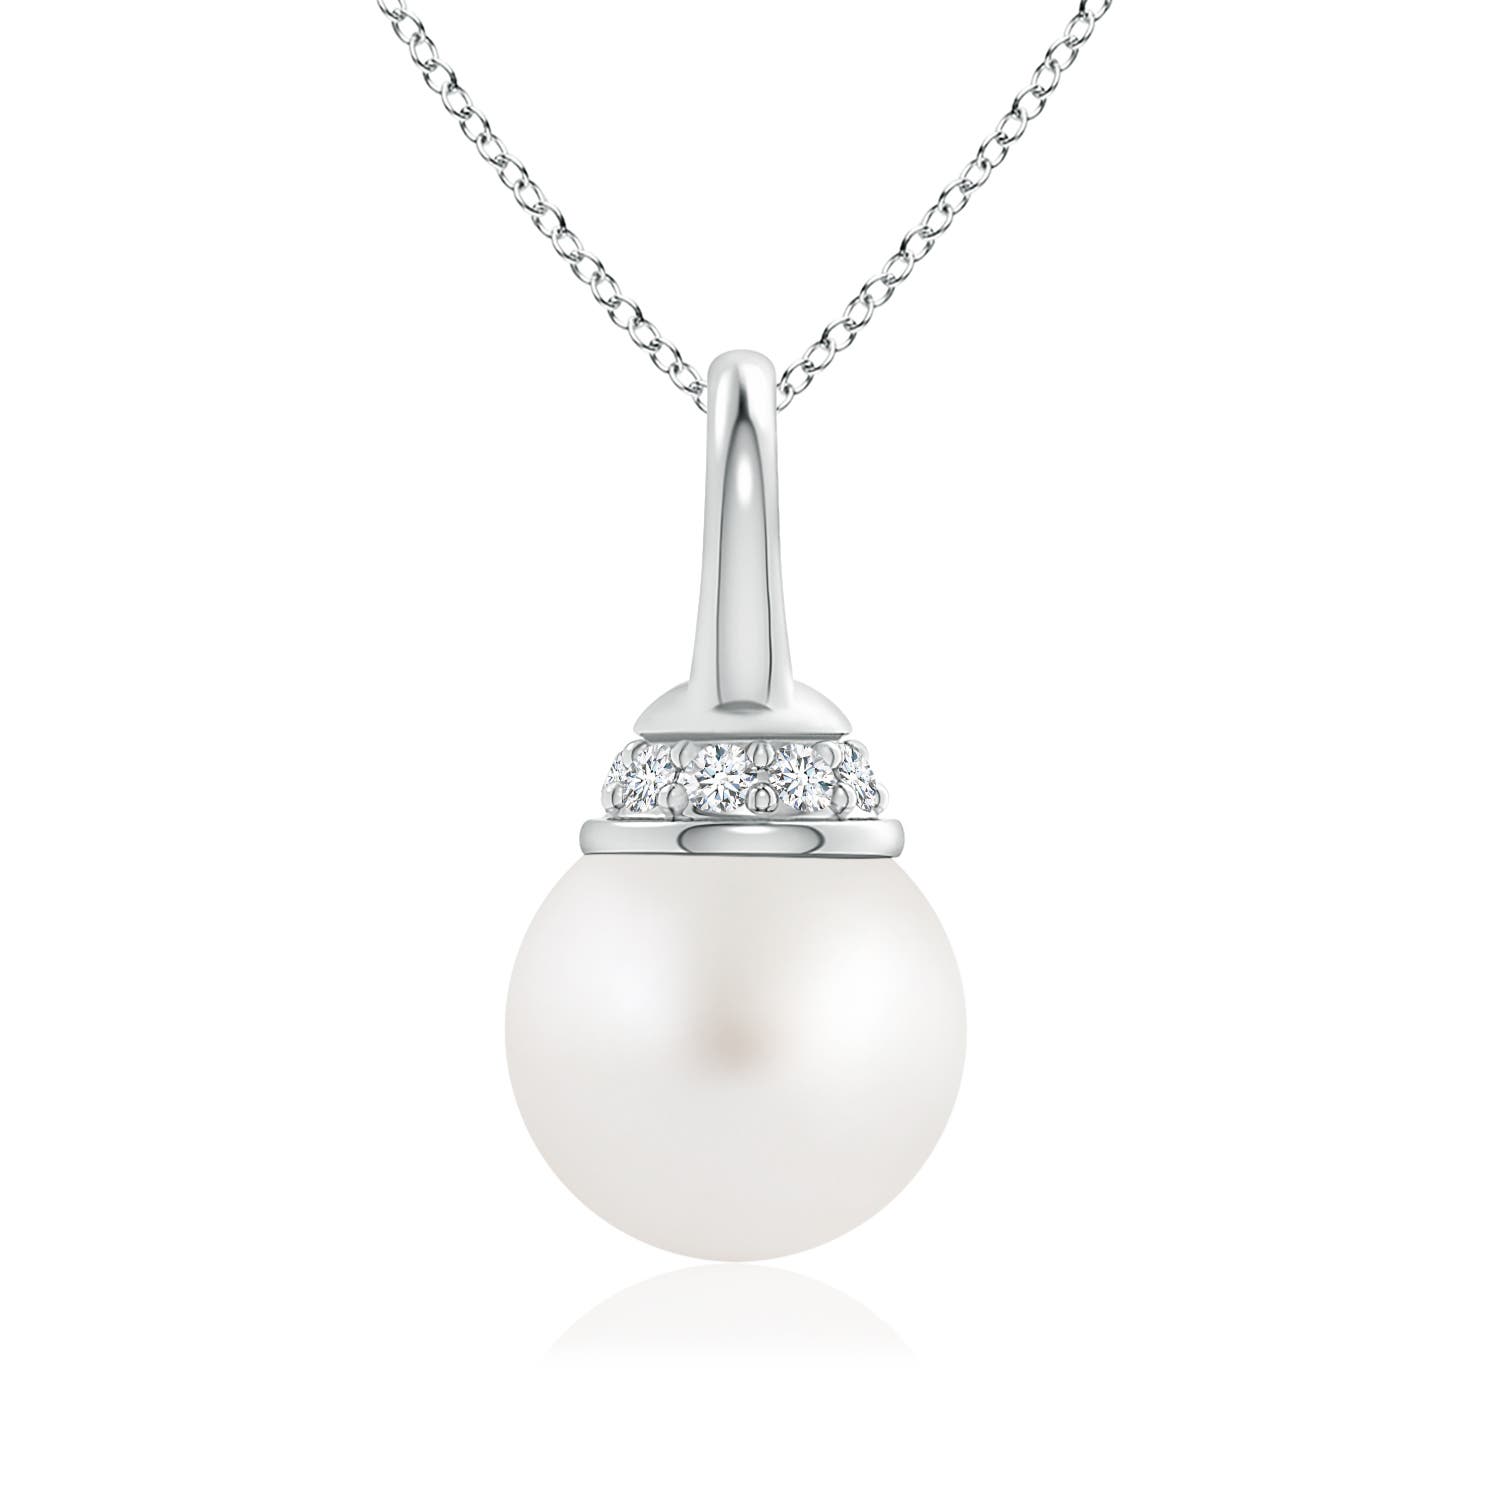 AA - South Sea Cultured Pearl / 3.79 CT / 14 KT White Gold